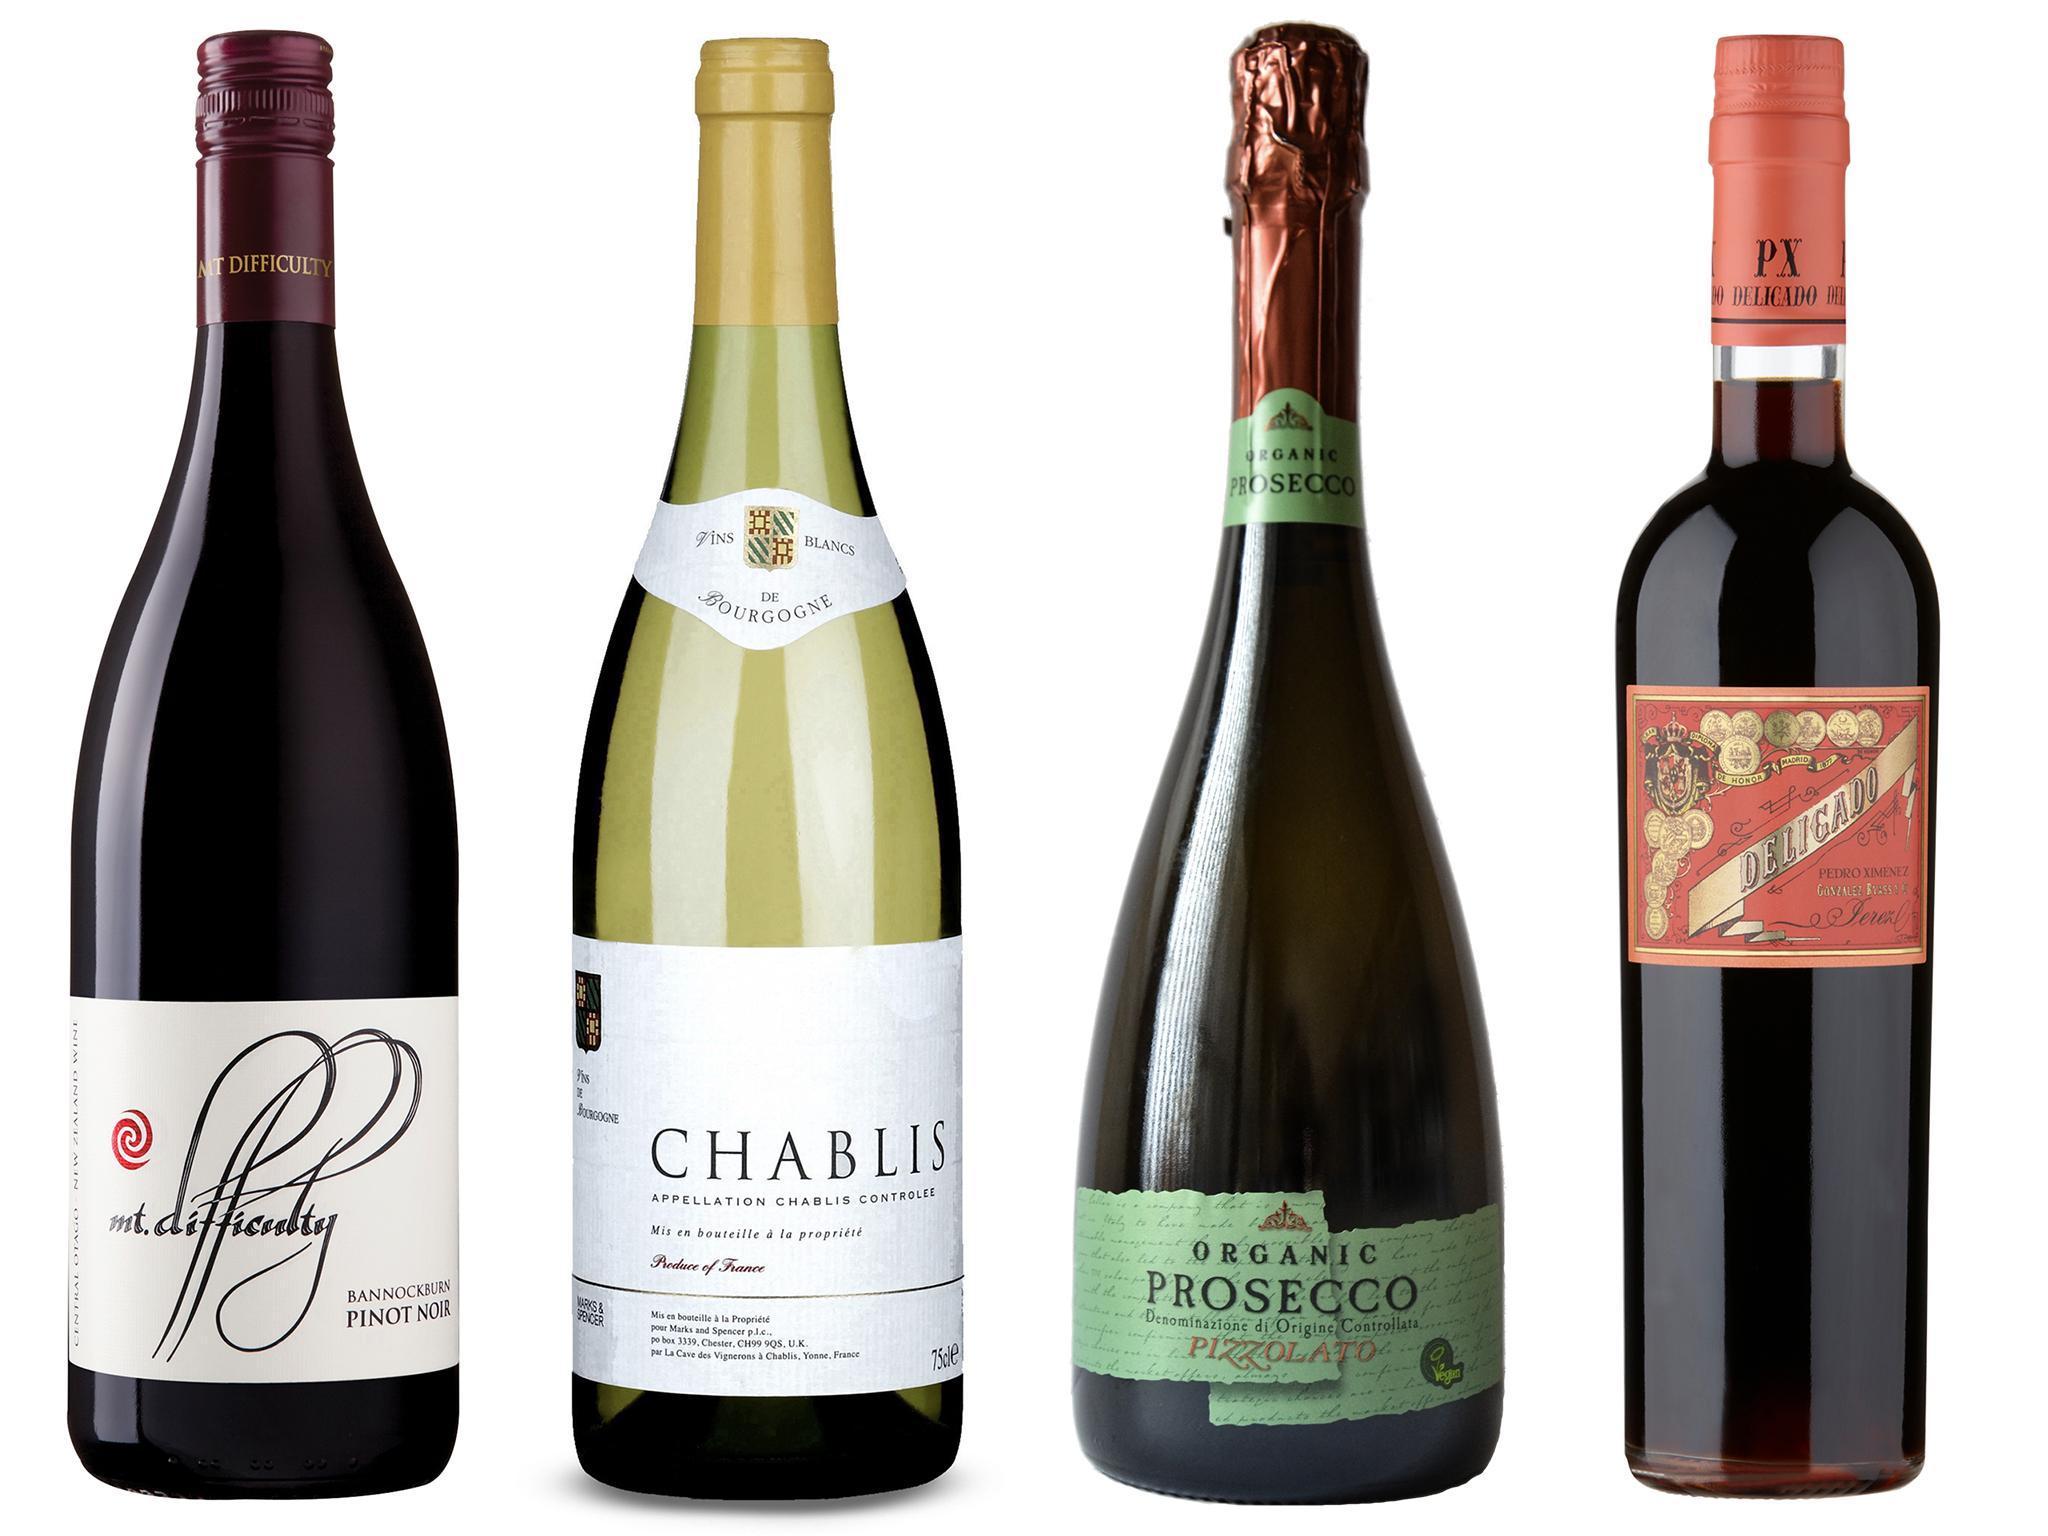 Pair this chablis (second left) with white fish or roast pork with apple sauce, while the New Zealand pinot noir (left) is perfect with roast lamb